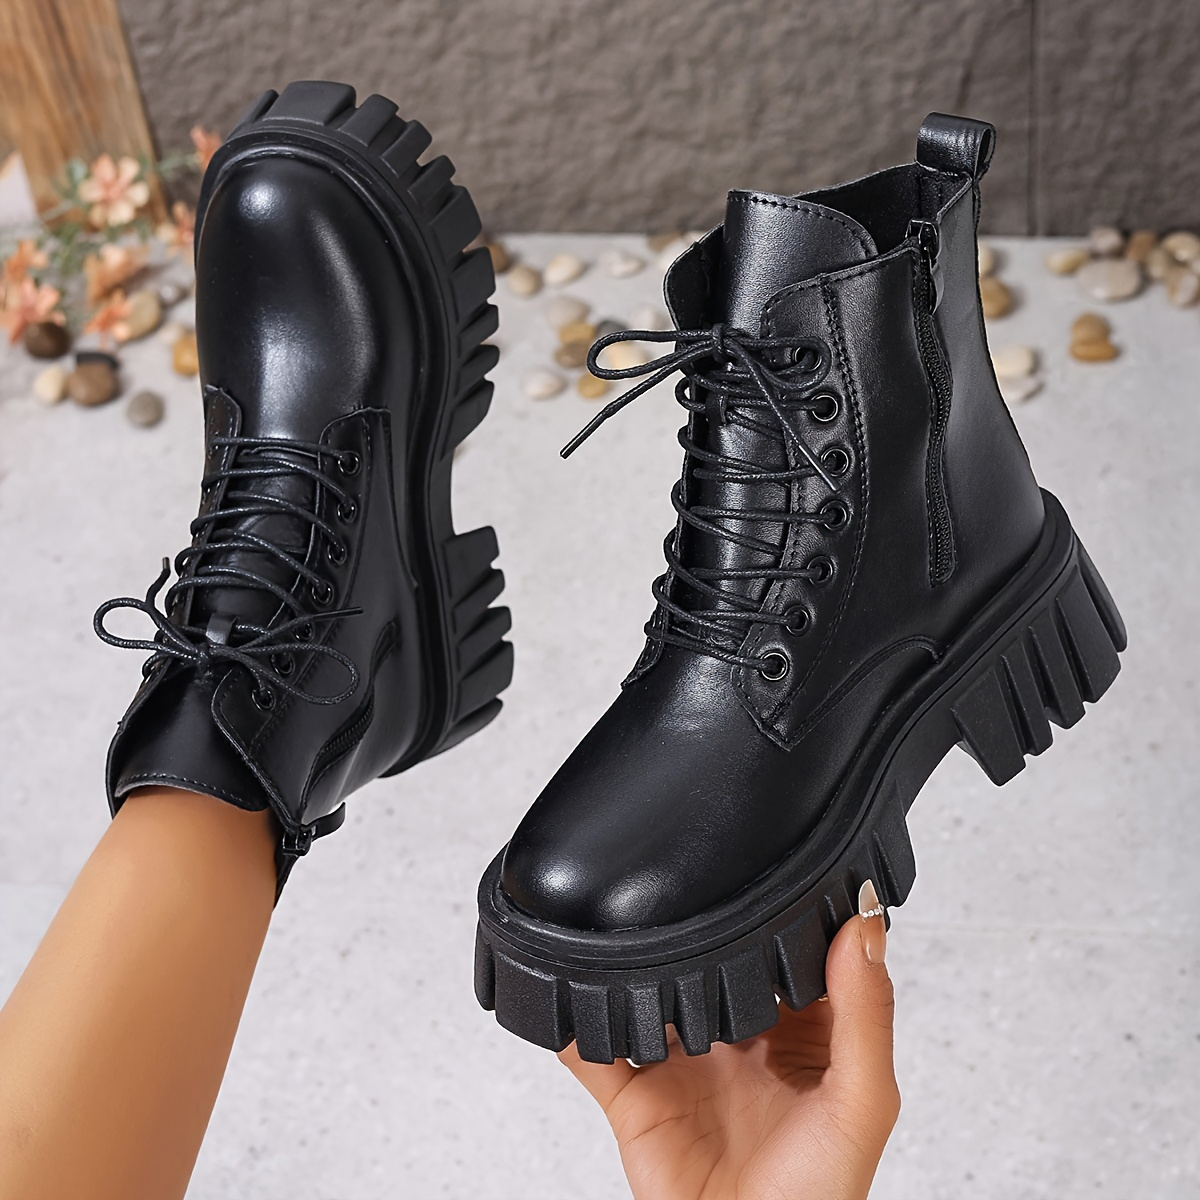 

Women's Fashion Ankle Combat Boots, Black Lace-up Platform Chunky Boots, Casual Short Boots With Side Zipper